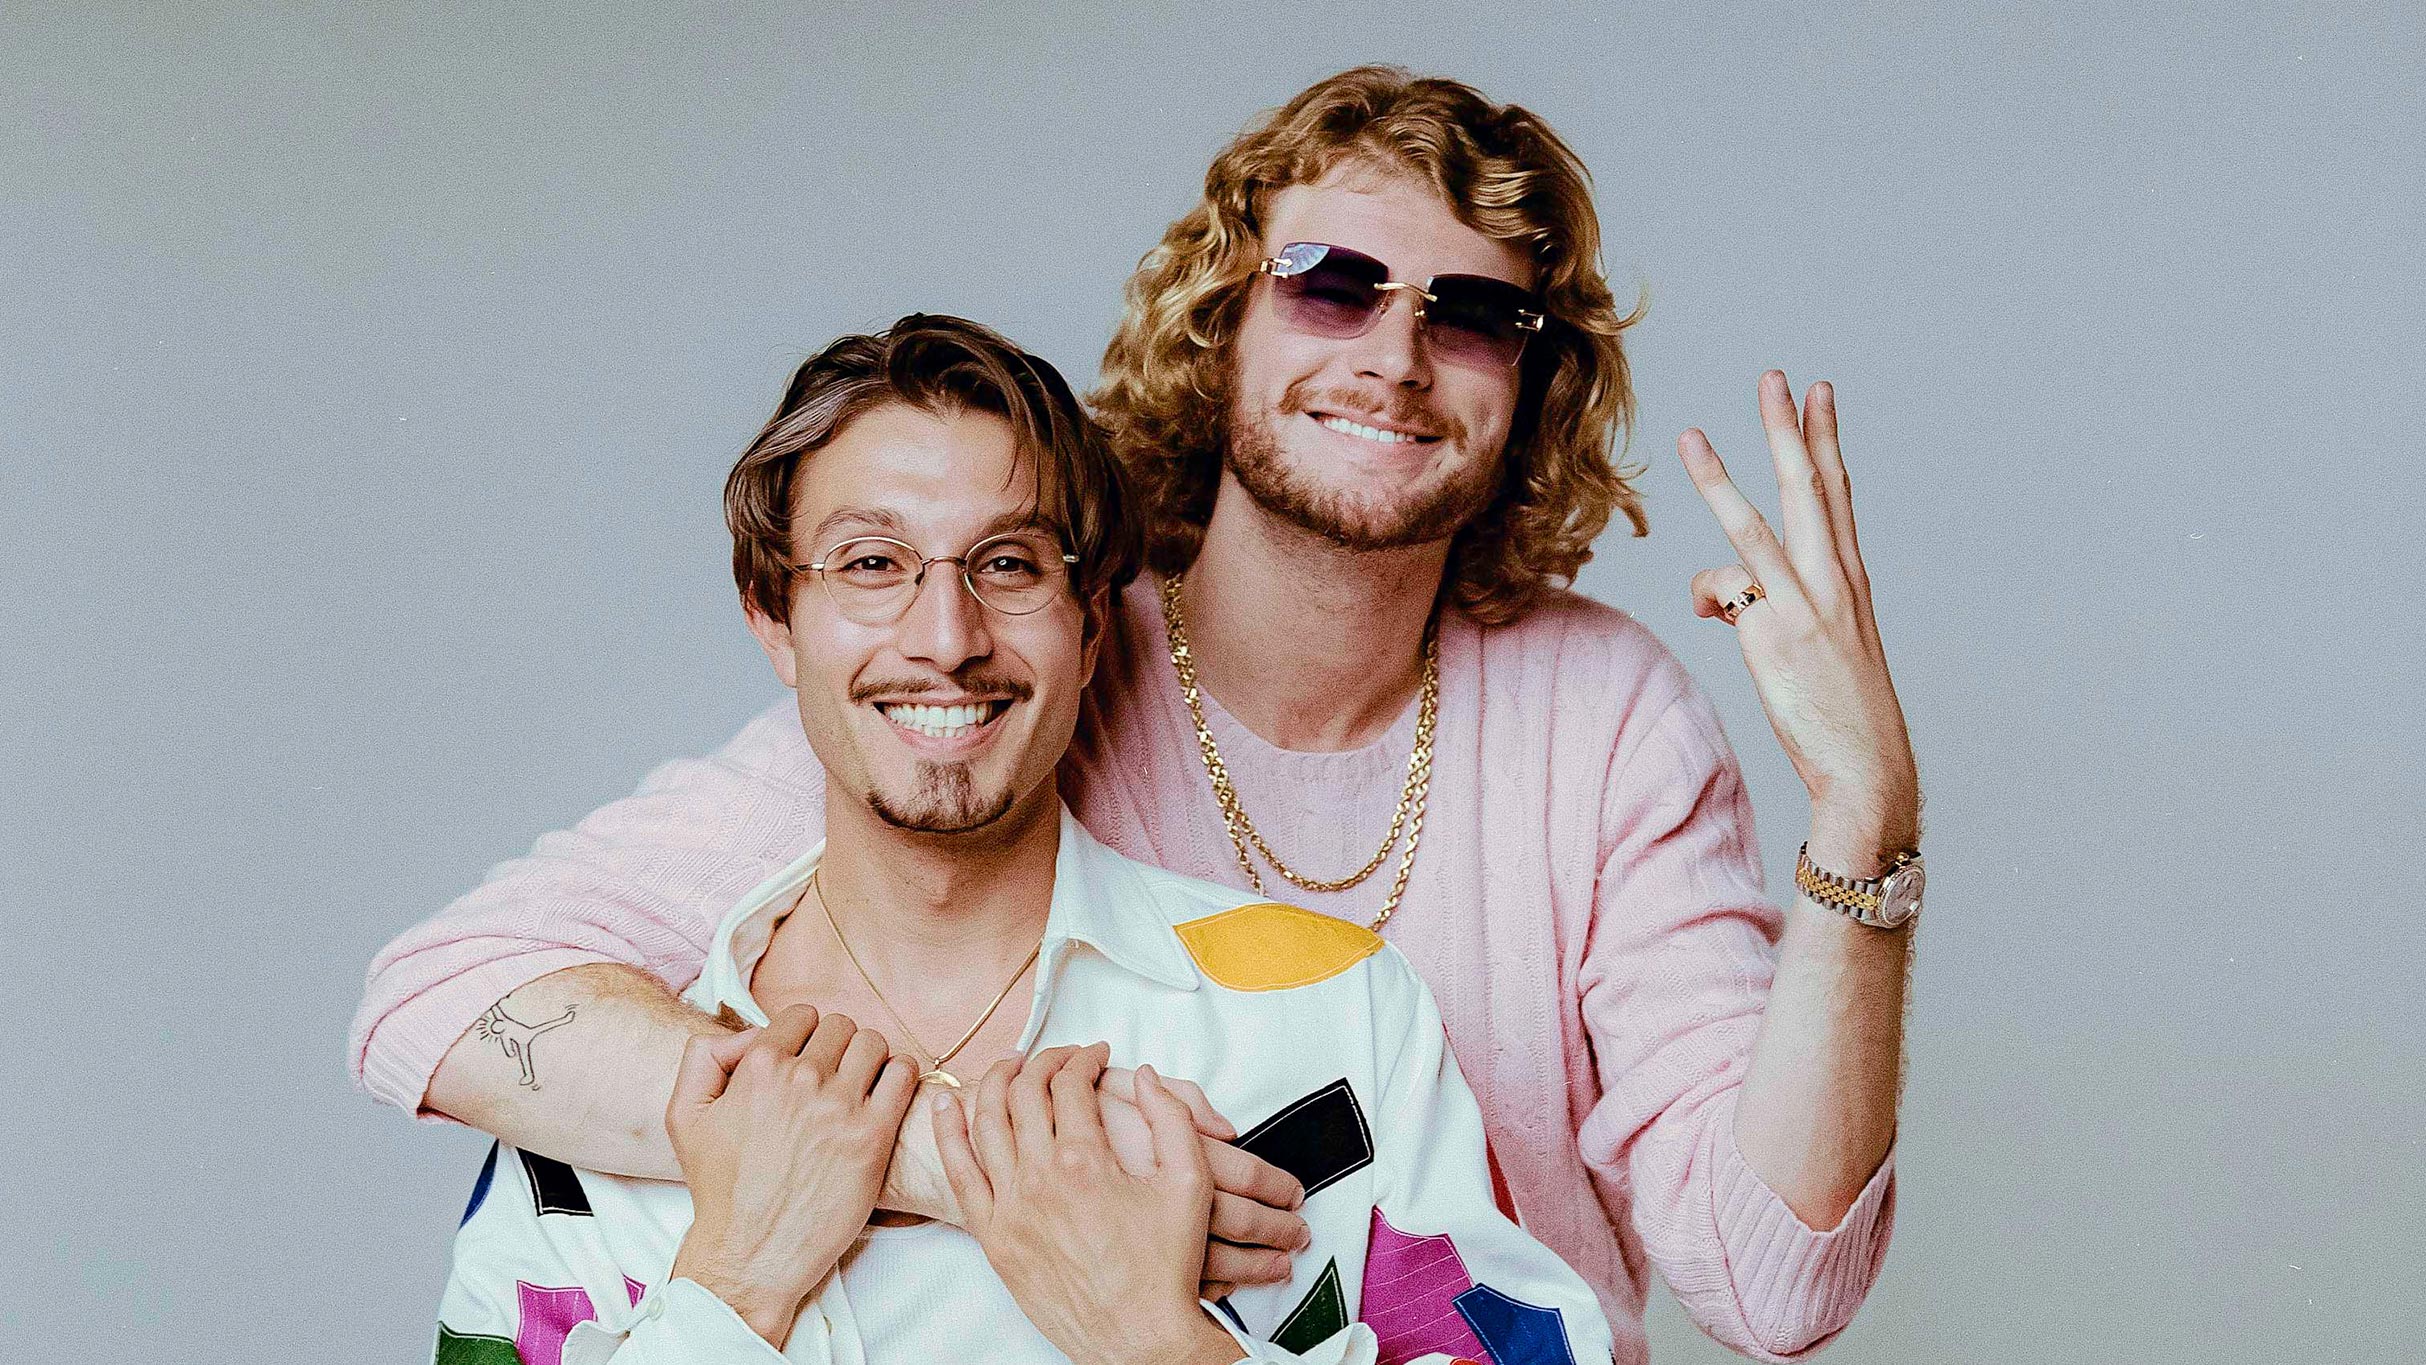 Baby Gravy (Yung Gravy & bbno$)  in West Melbourne promo photo for Exclusive presale offer code